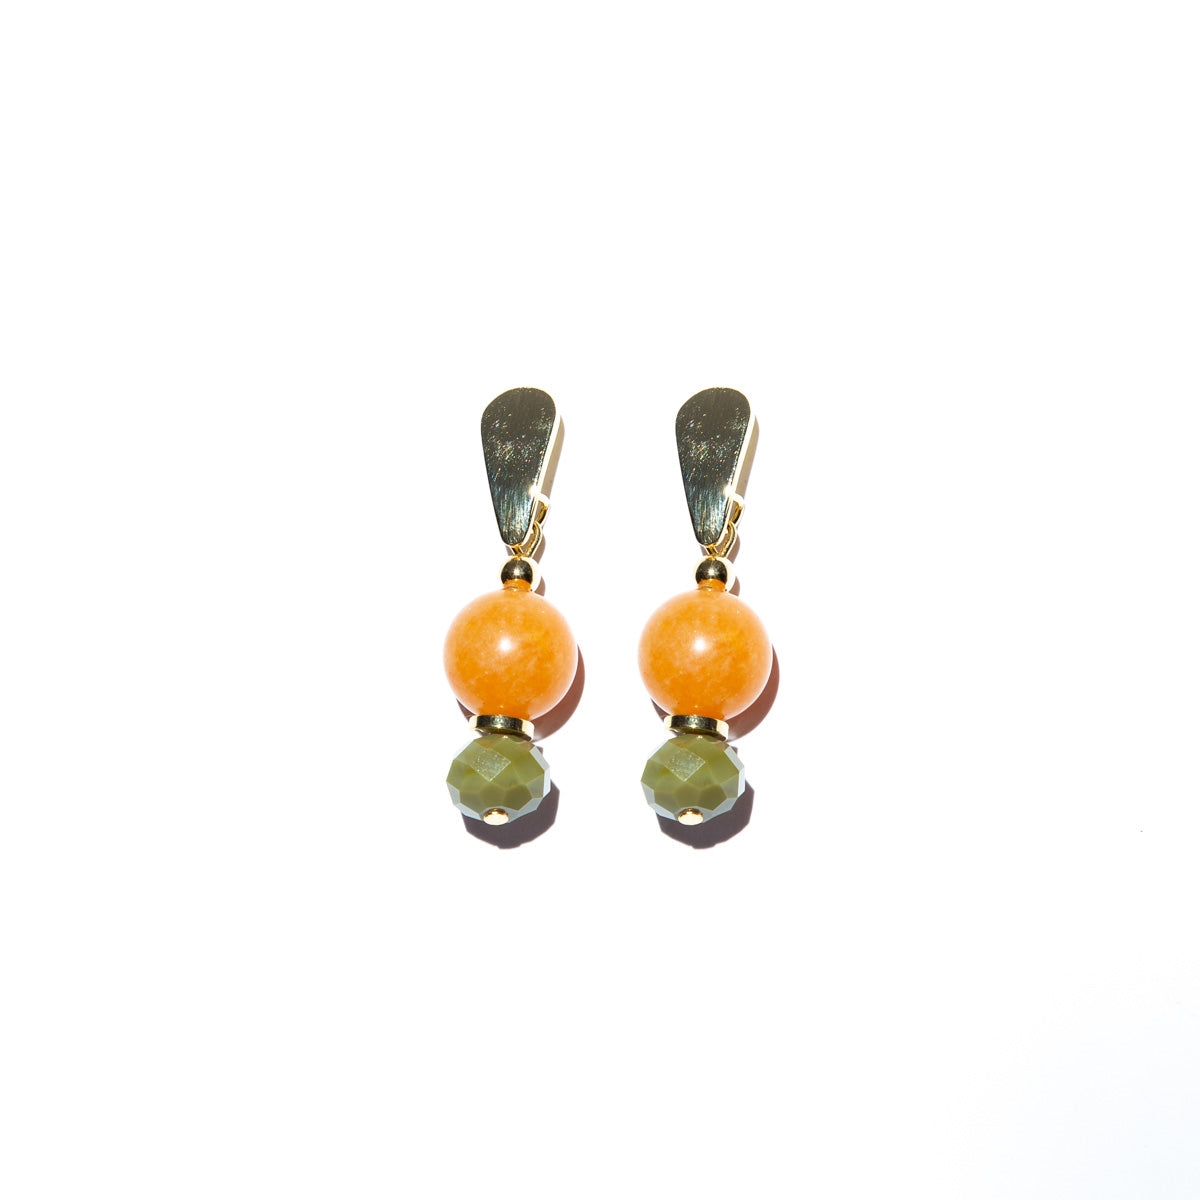 Earring with aventurine stone, crystals, and gold-plated metals